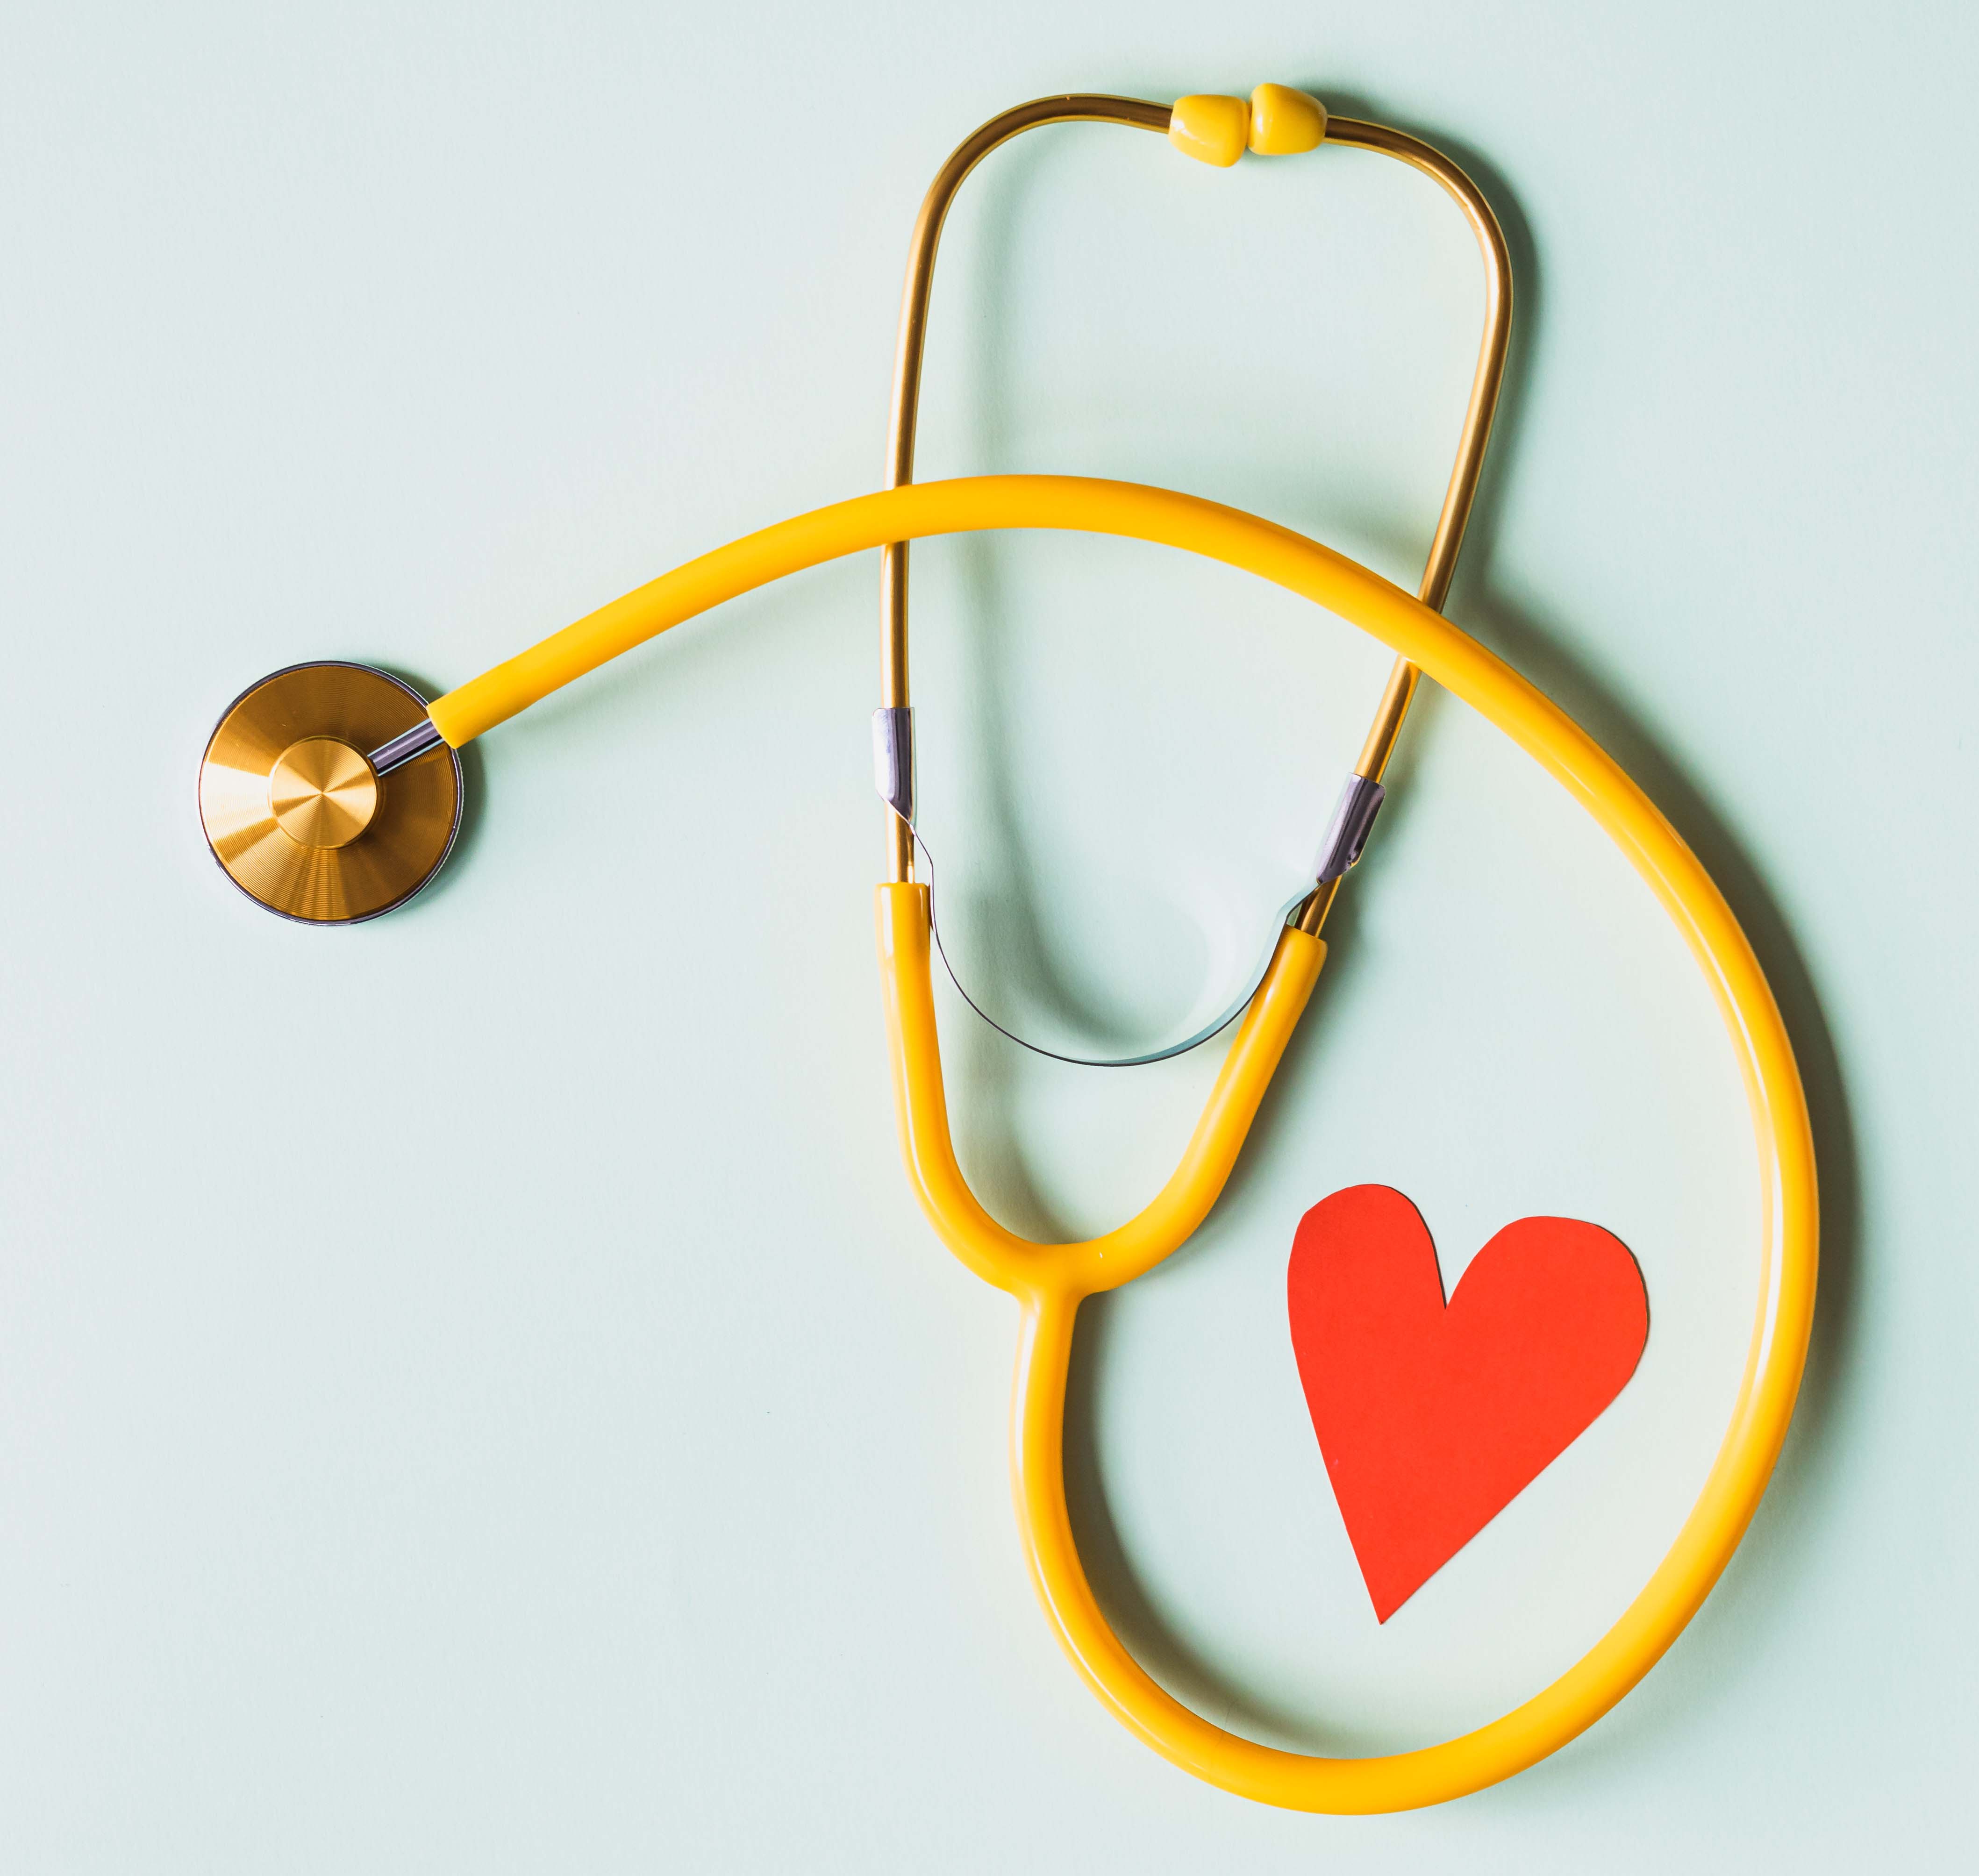 Heart and Stethoscope